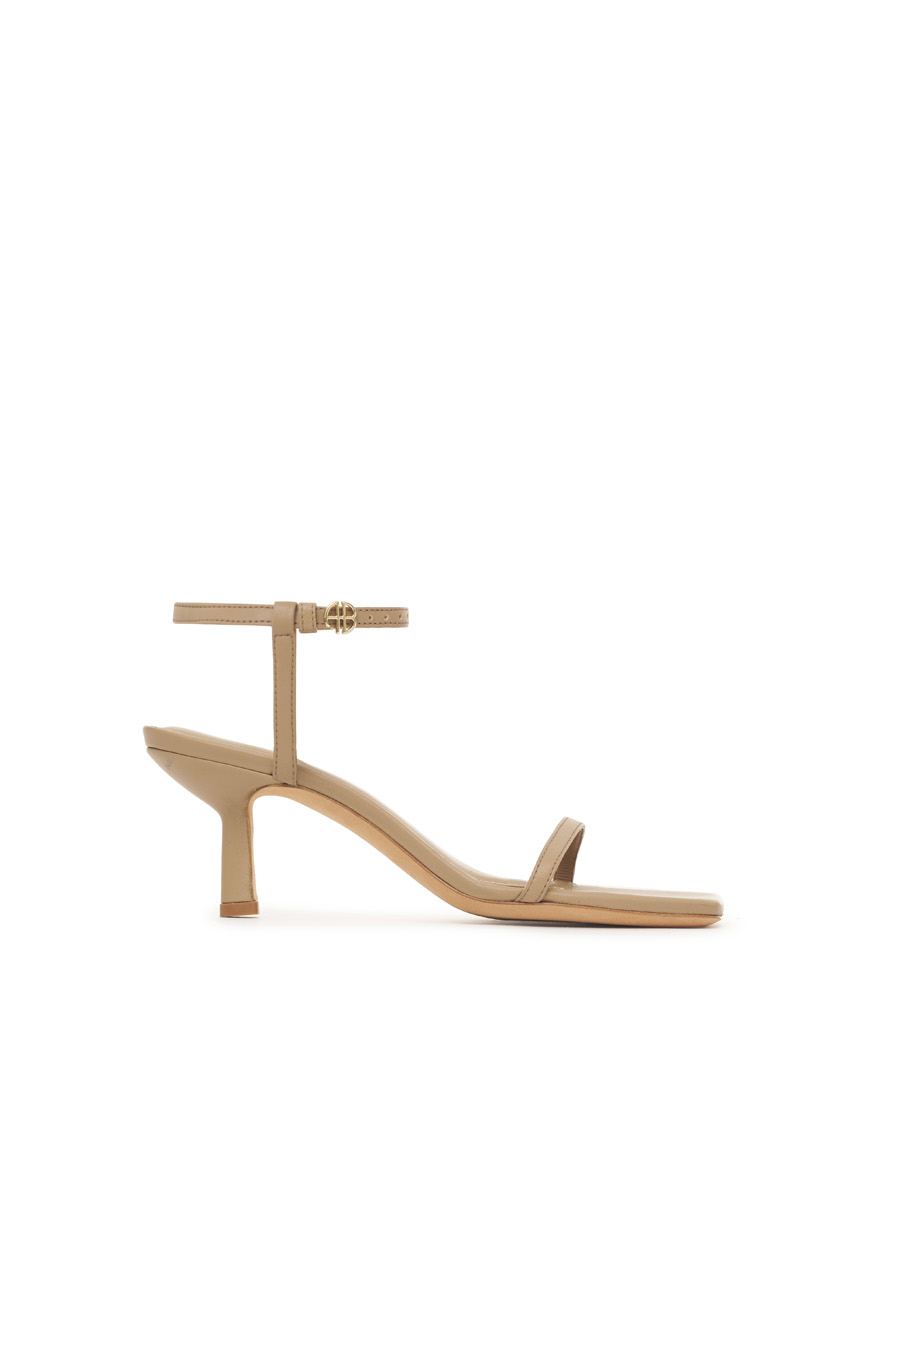 Anine Bing Invsible Sandals in Butterscotch